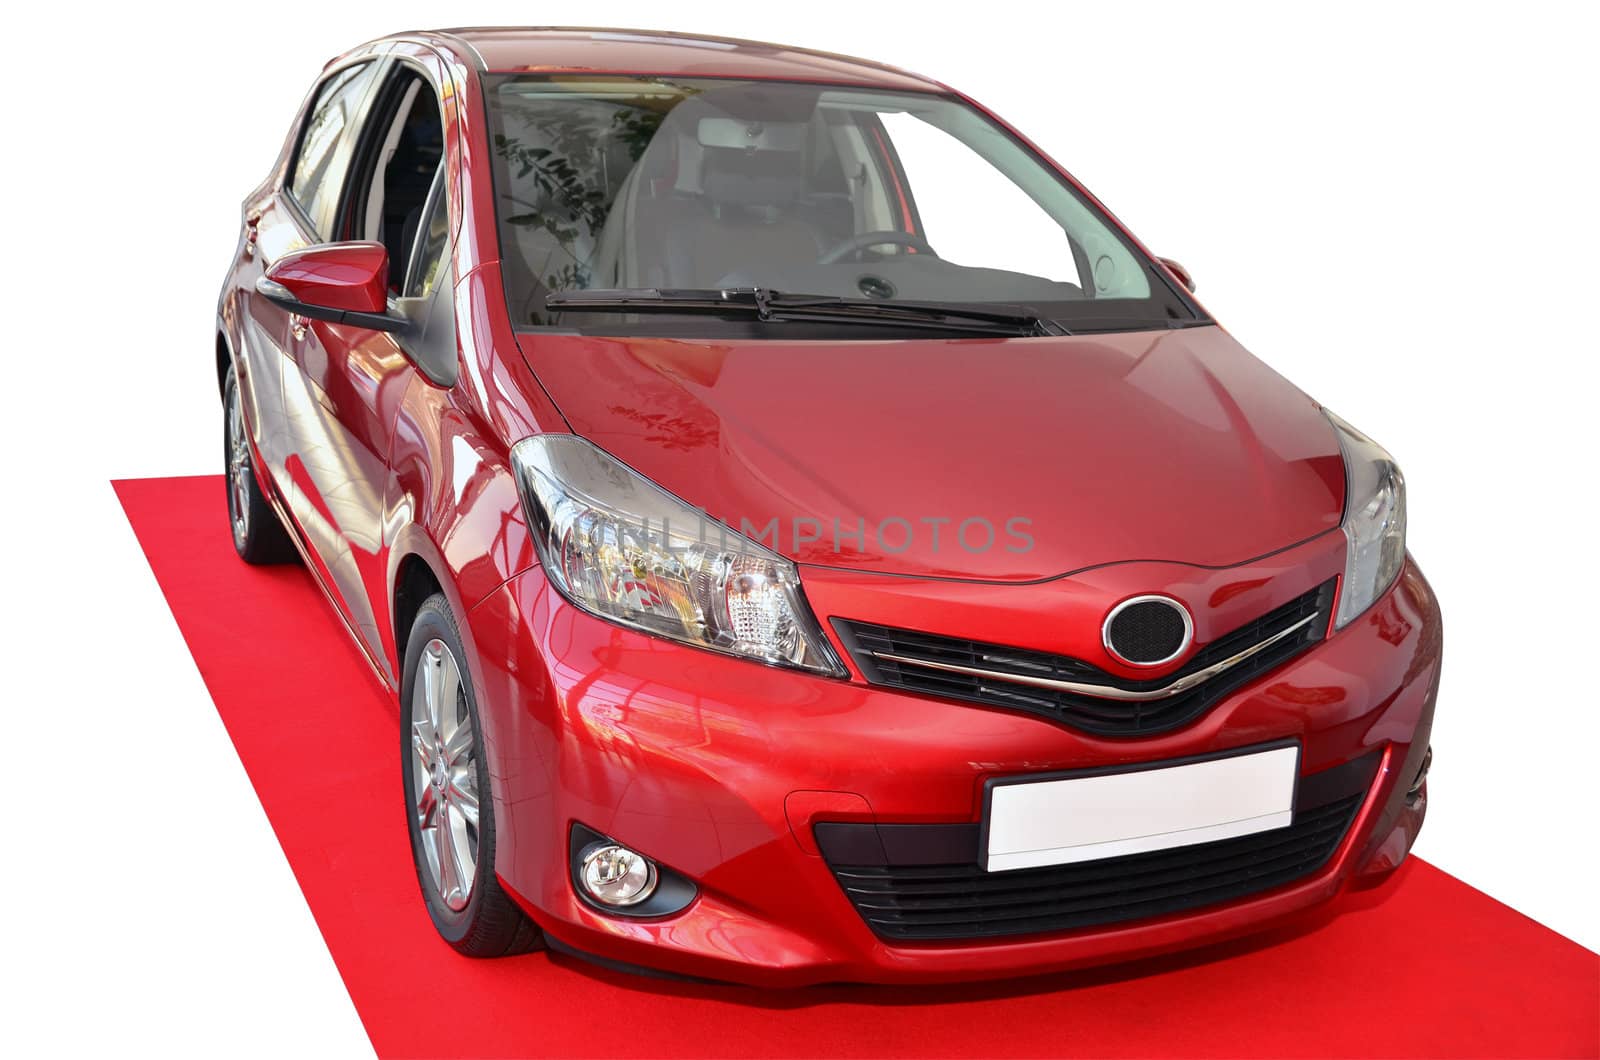 New Toyota Yaris on red carpet. Isolated on white.